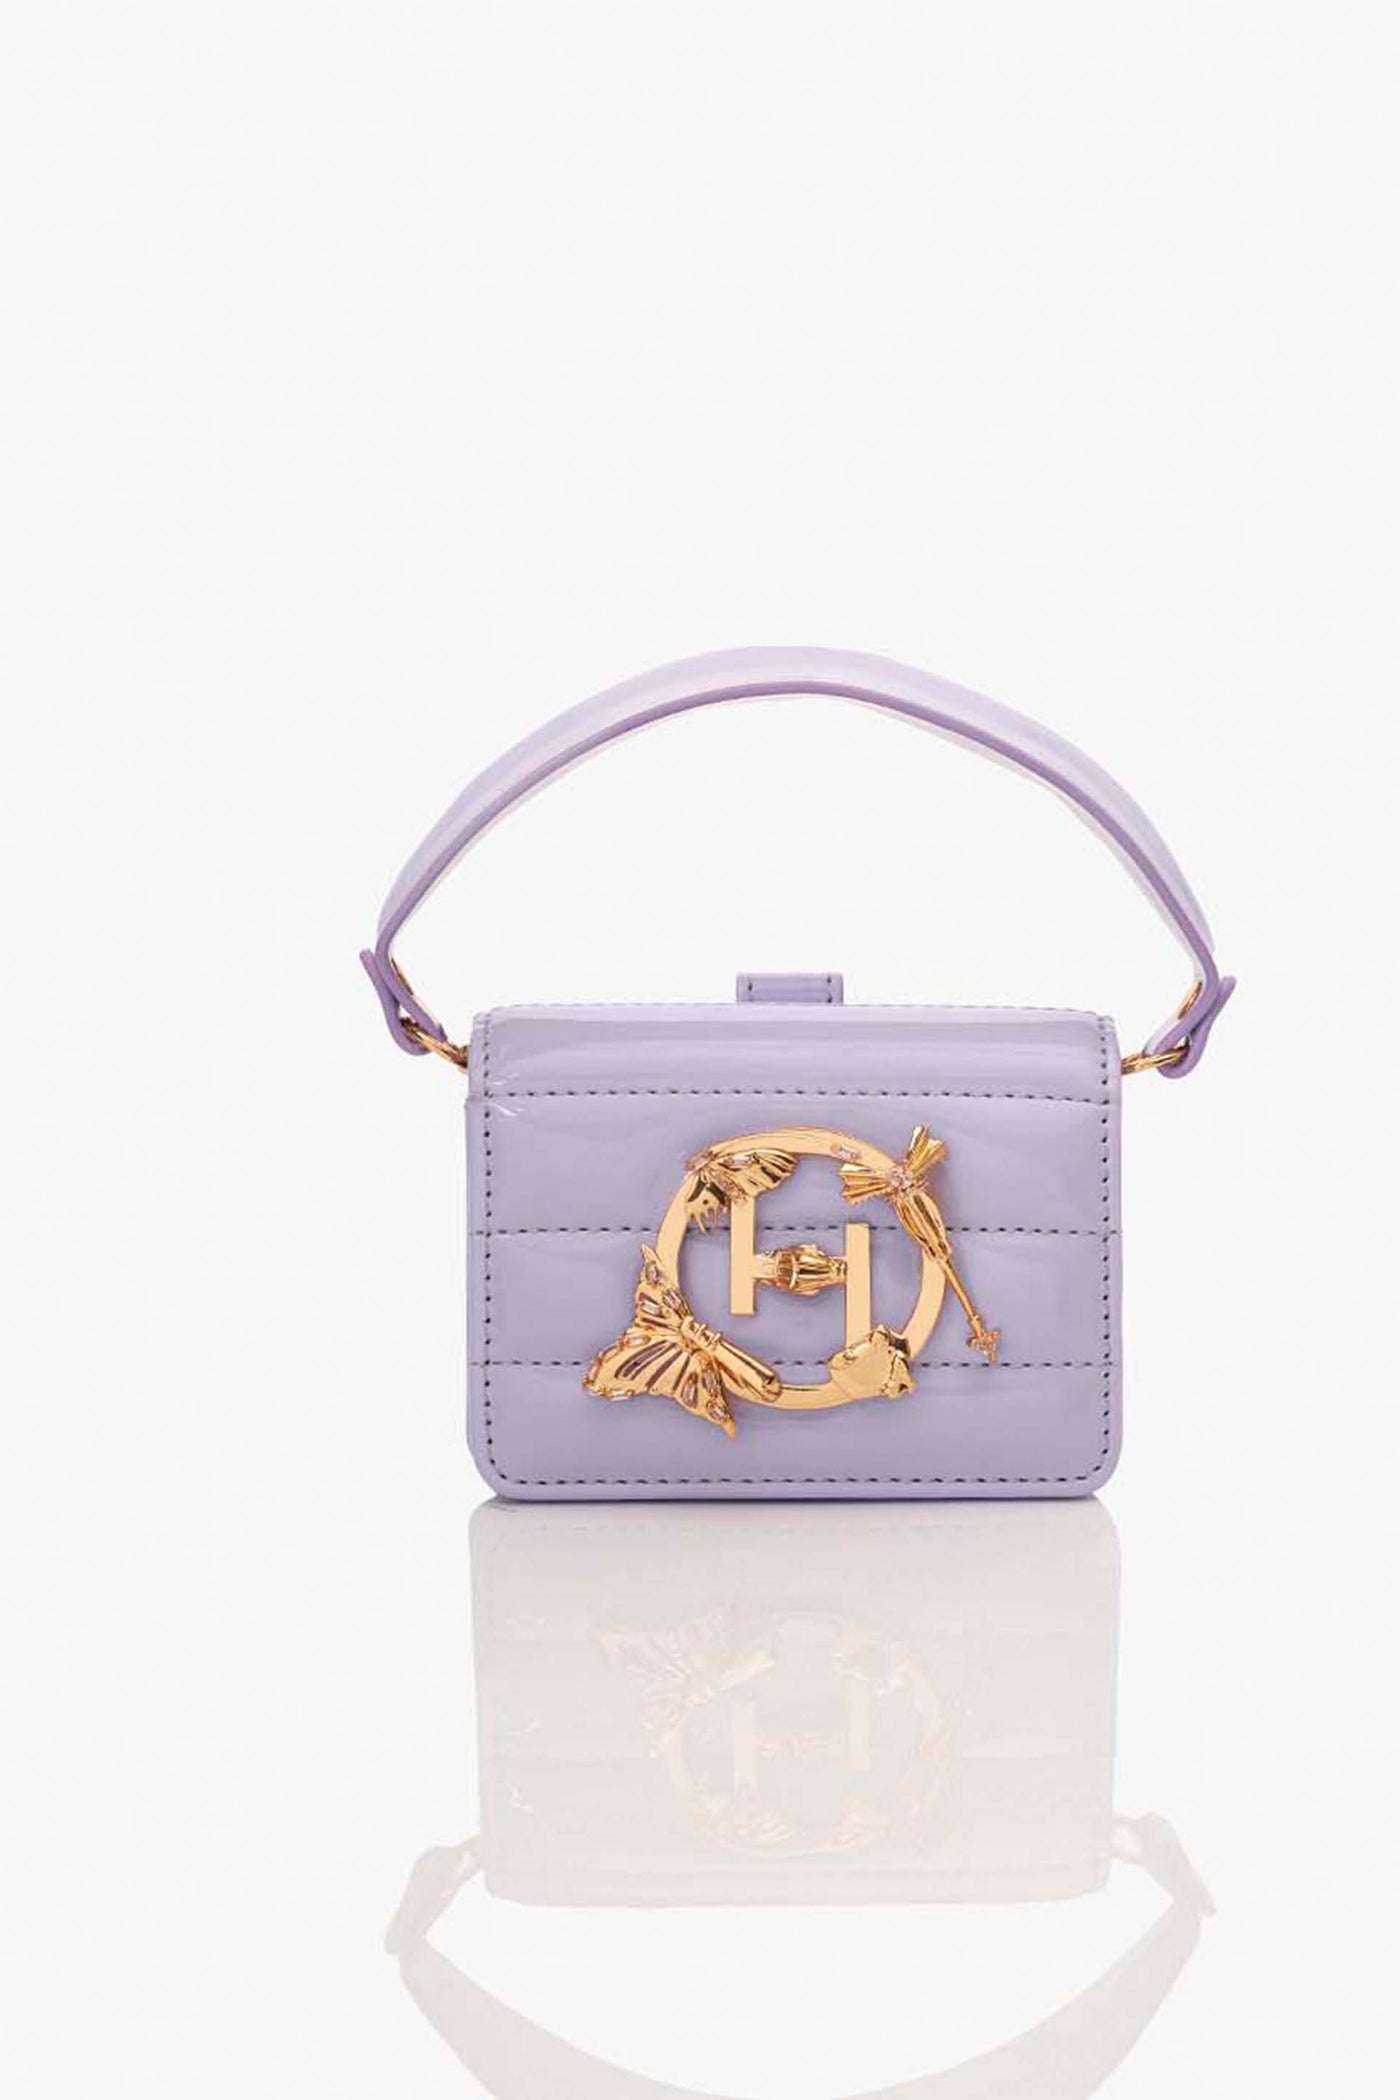 Outhouse OH V Furbie in Lavenderaccessories online shopping melange singapore indian designer wear